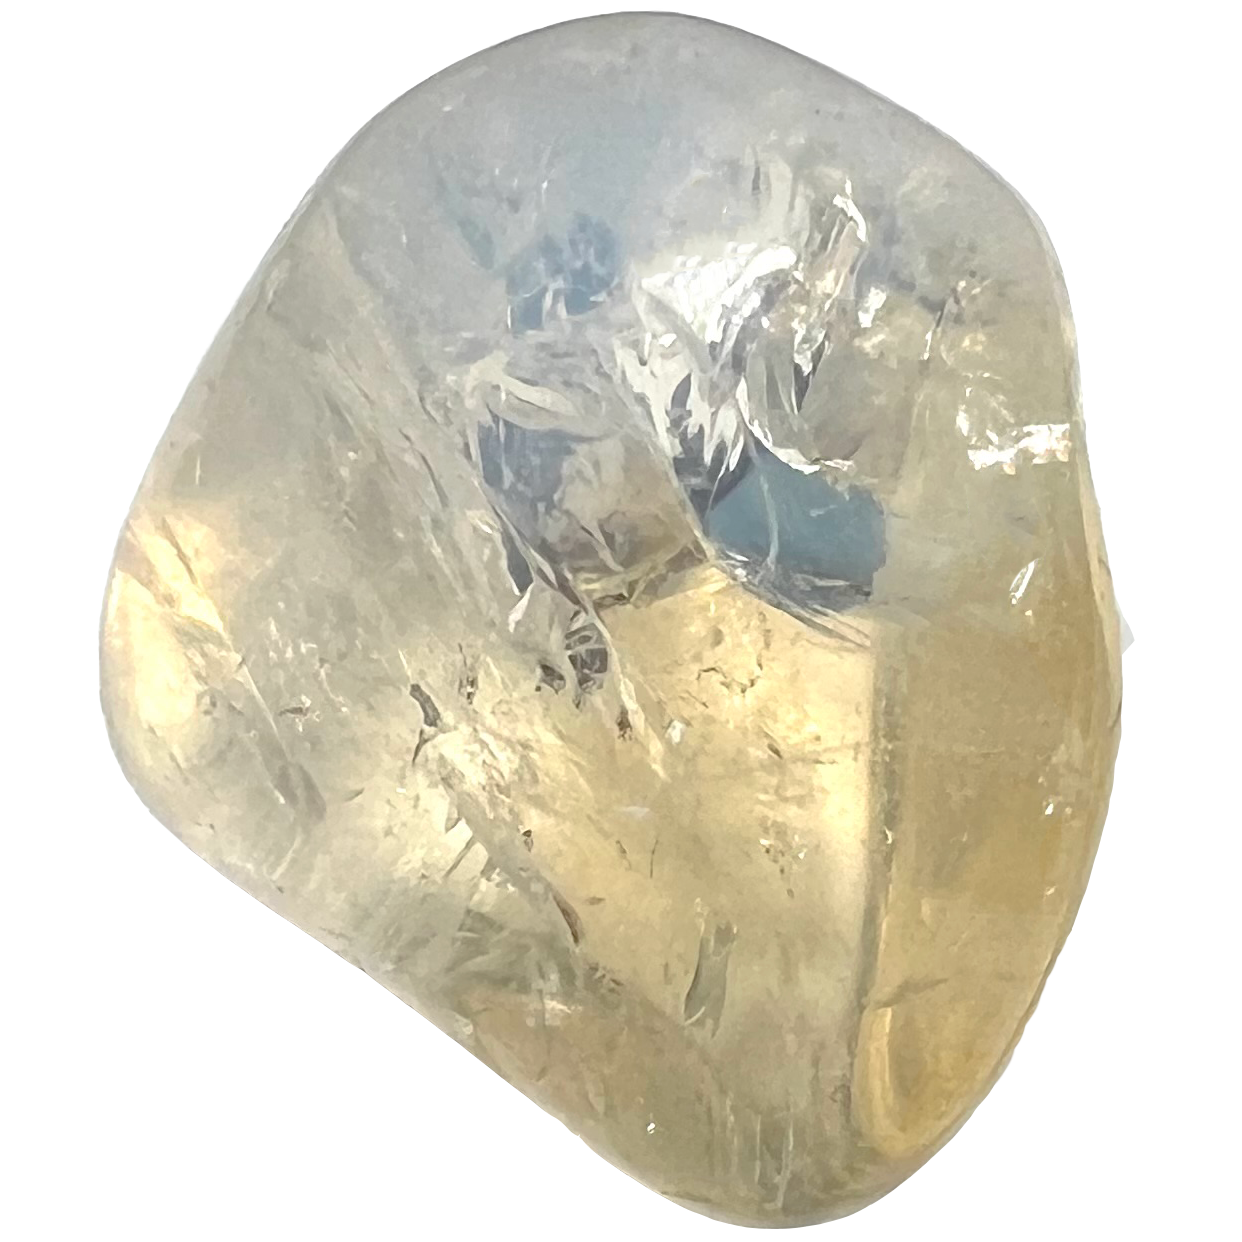 A tumbled piece of opalized glass stone.  The stone is yellow with a pearlescent bluish white sheen.